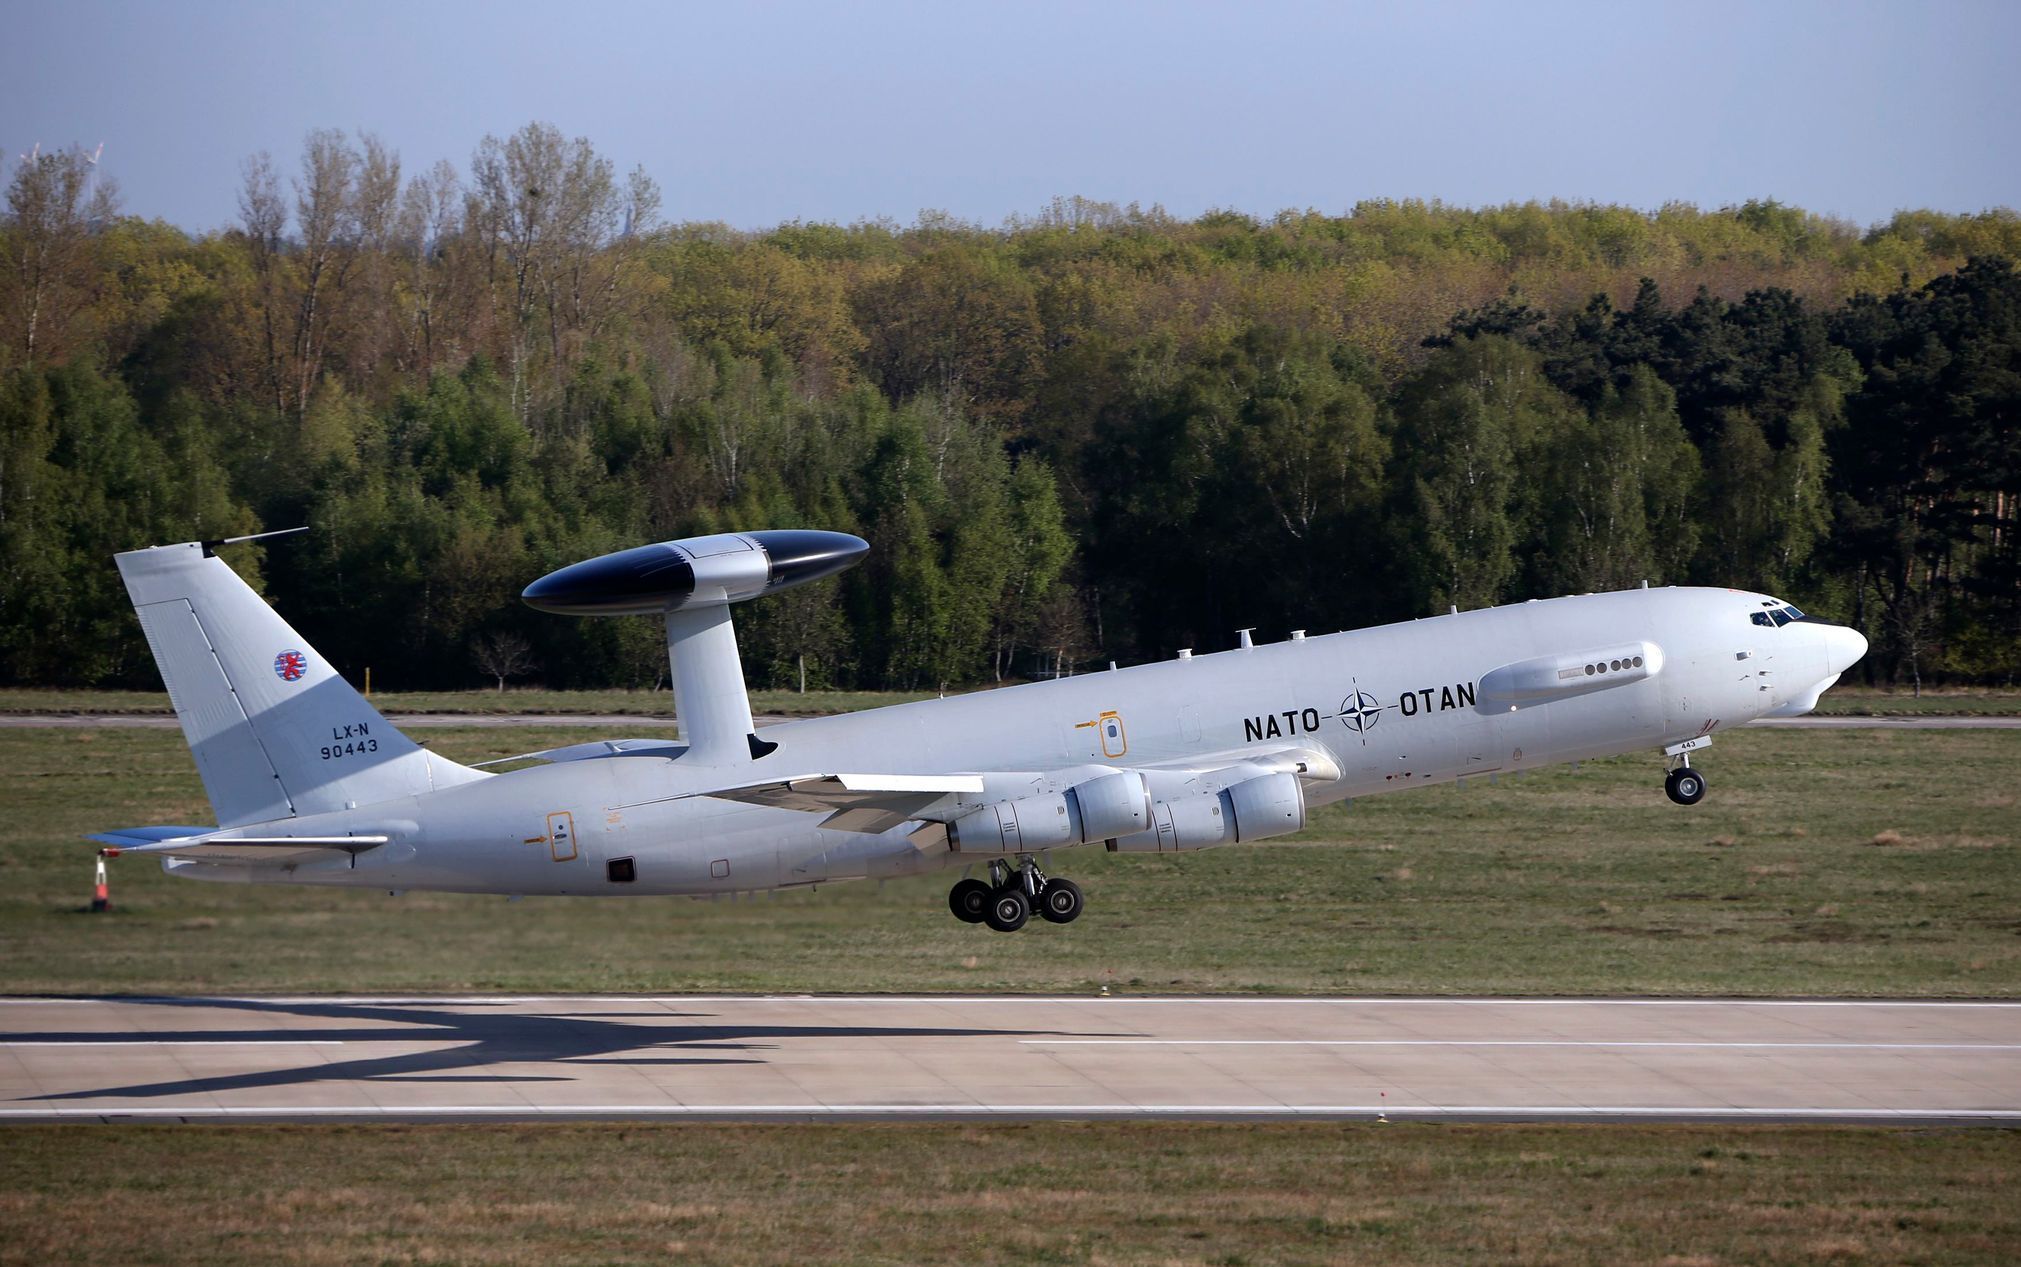 A NATO Airborne Warning and Control Systems aircraft takes-off for flight to Romania from the AWACS air base in Geilenkirchen, near the German-Dutch border